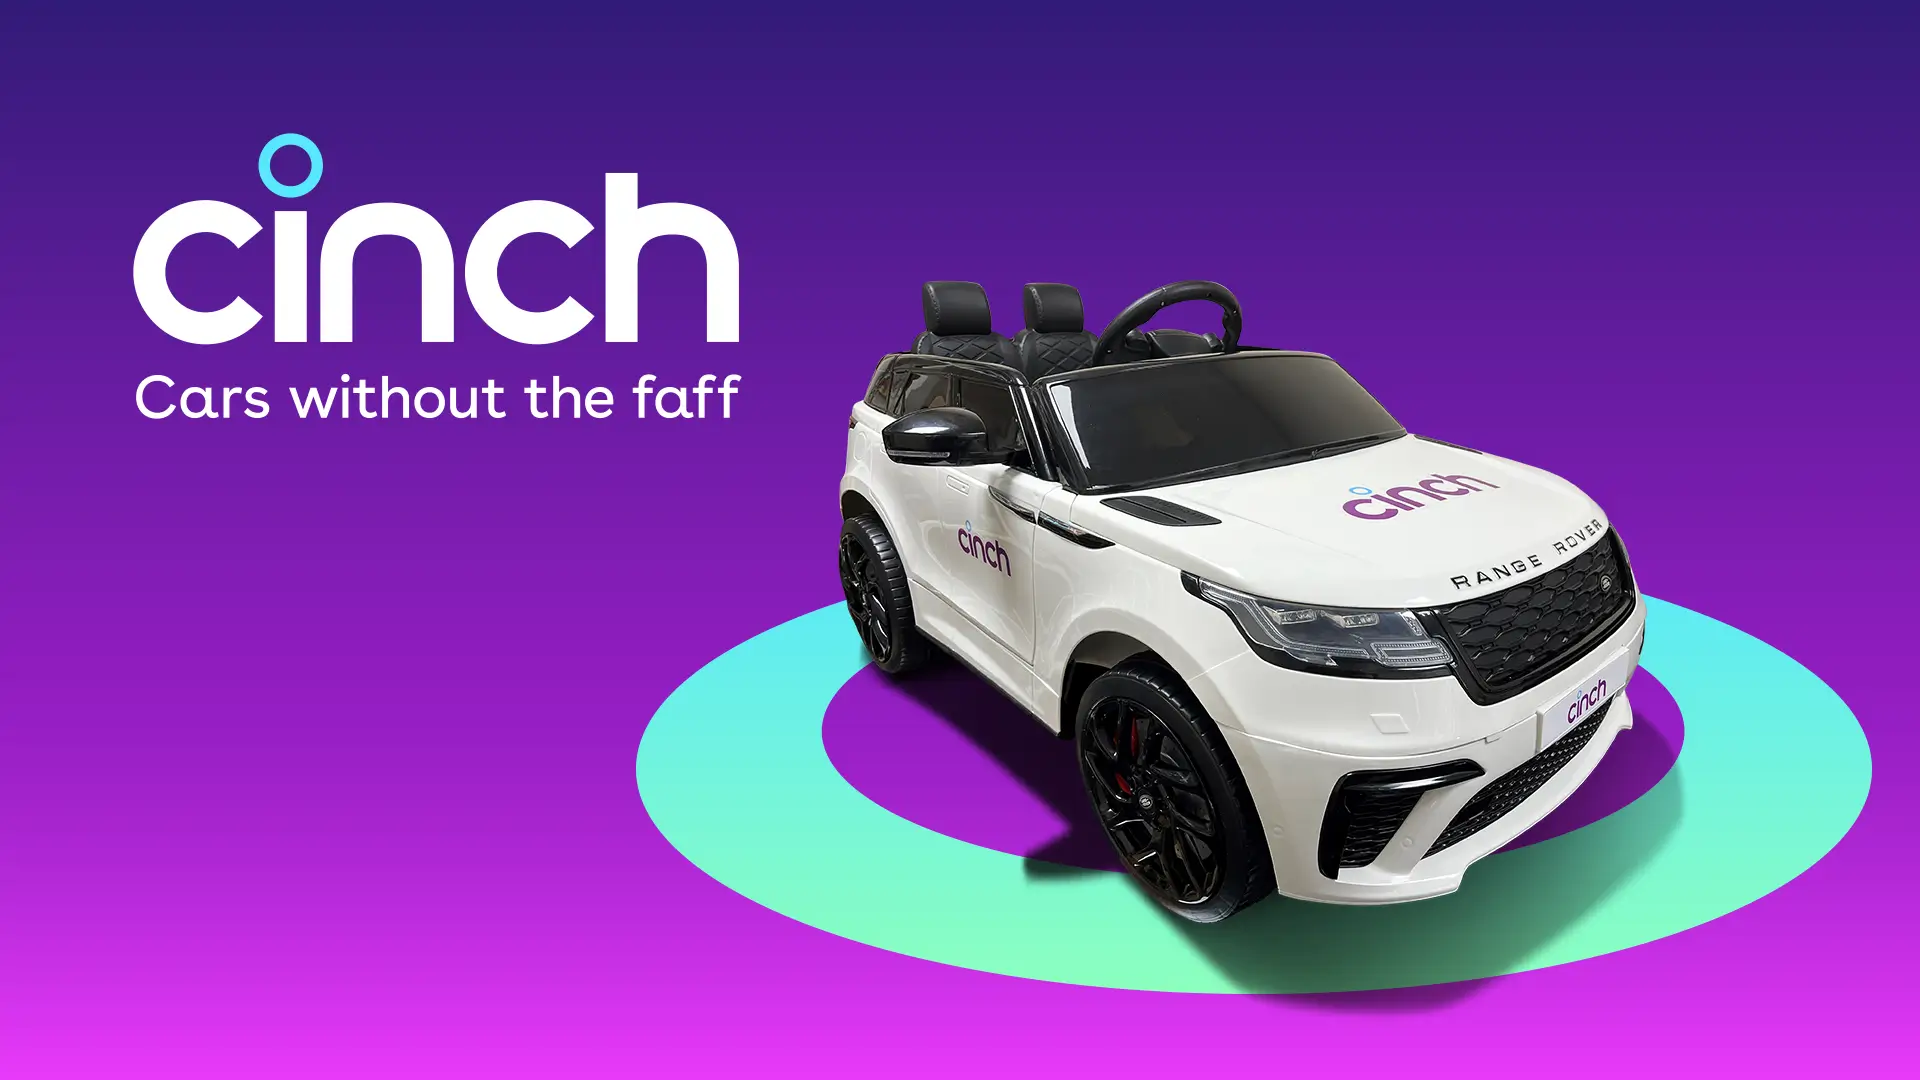 Win a Range Rover ride with Chris Evans with Virgin Radio UK & Cinch